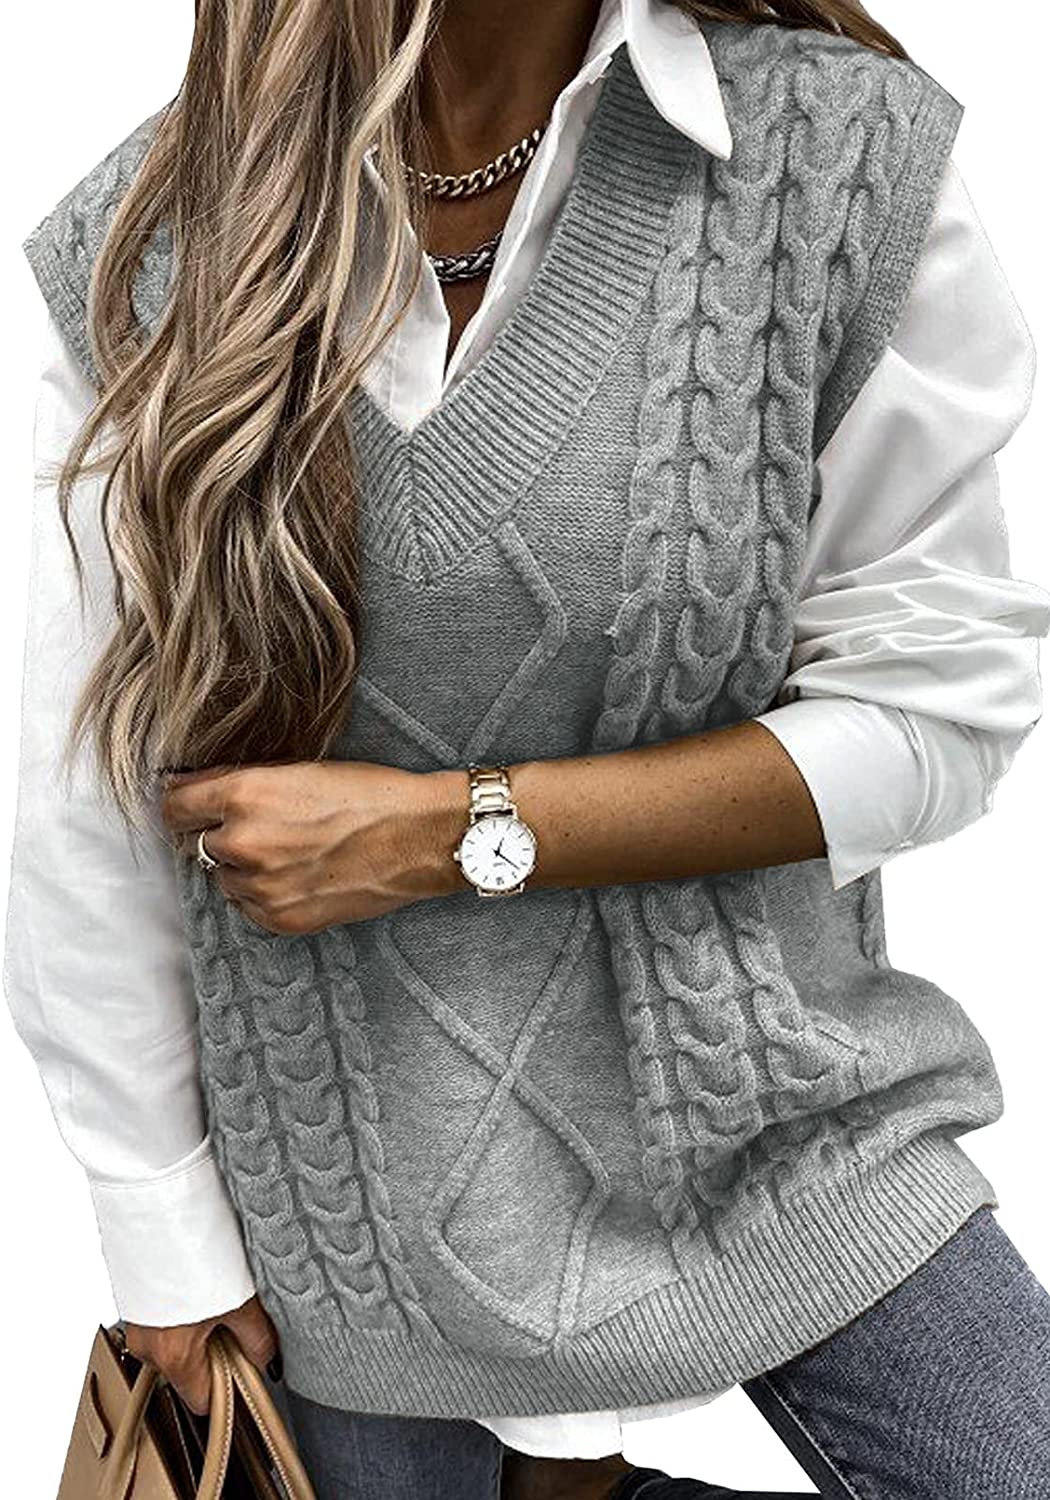 Women's Oversized Solid Color V-neck Knitted Vest Cable Sleeveless Sweater